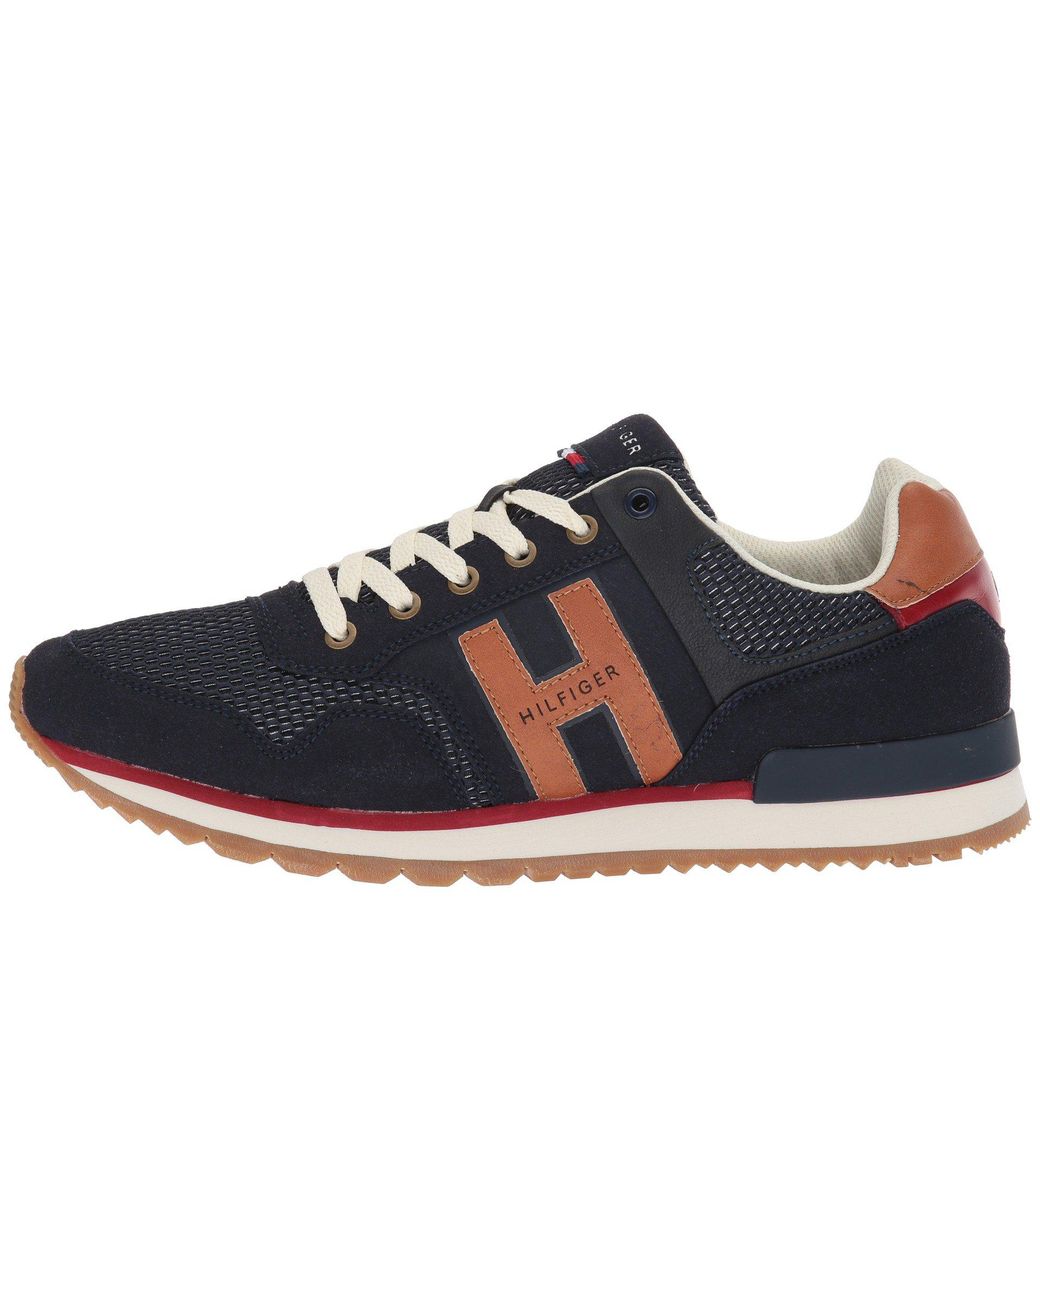 Tommy Hilfiger Shoes, Clothing and Accessories